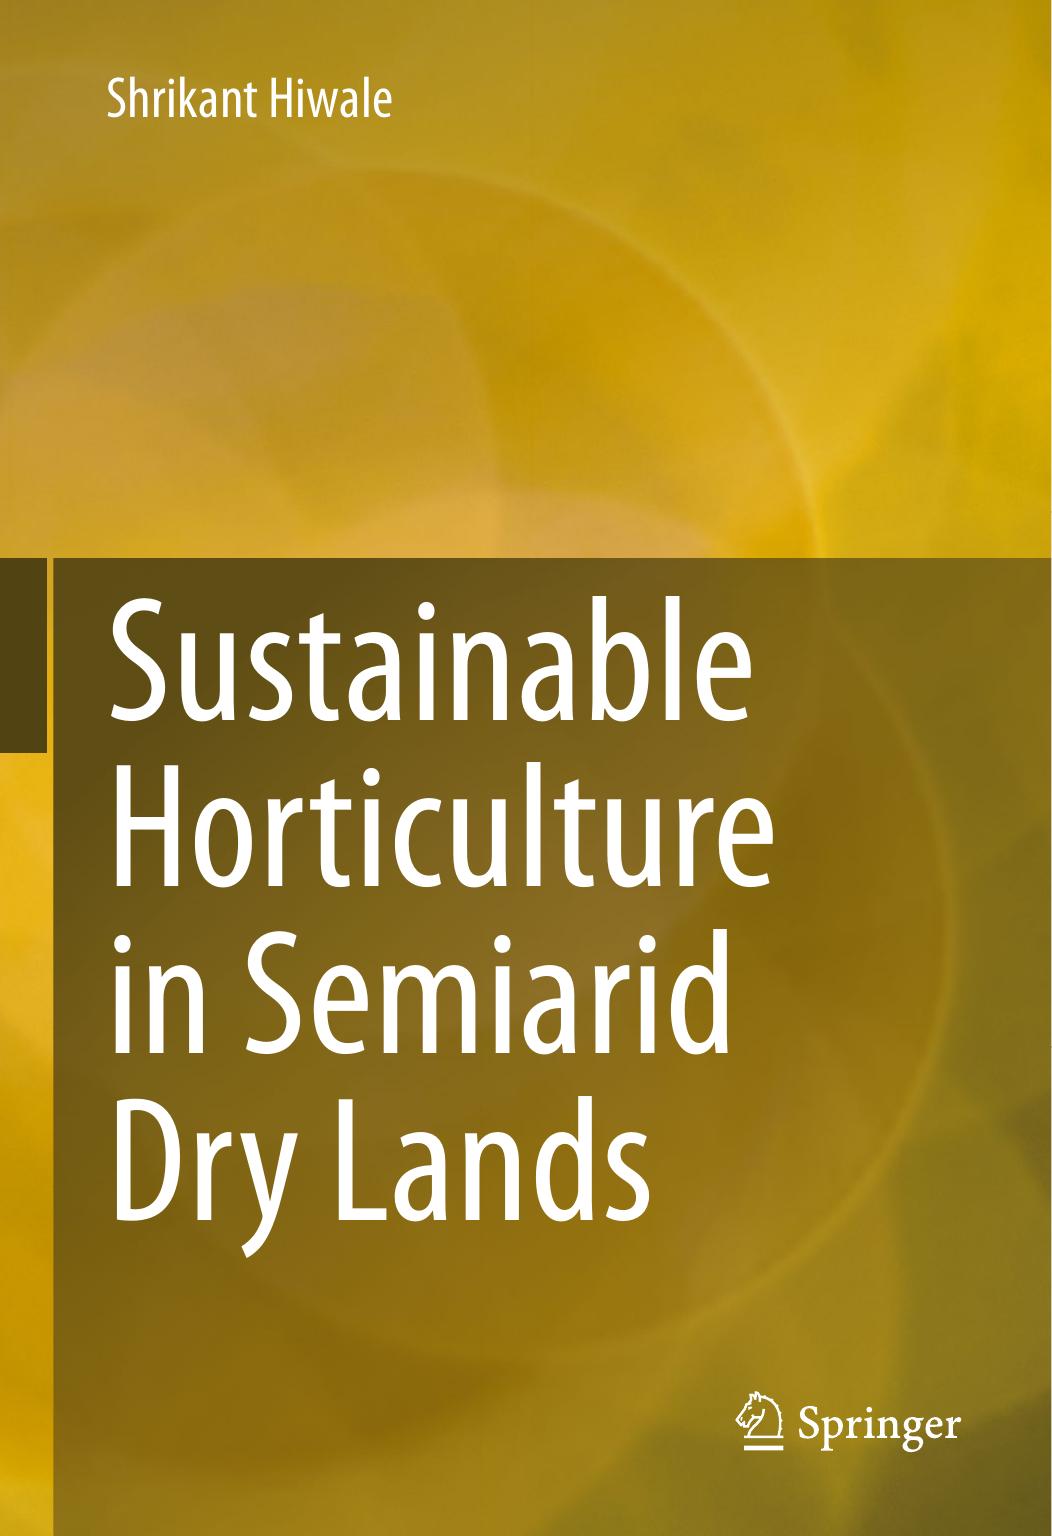 Sustainable Horticulture in Semiarid Dry Lands 2015